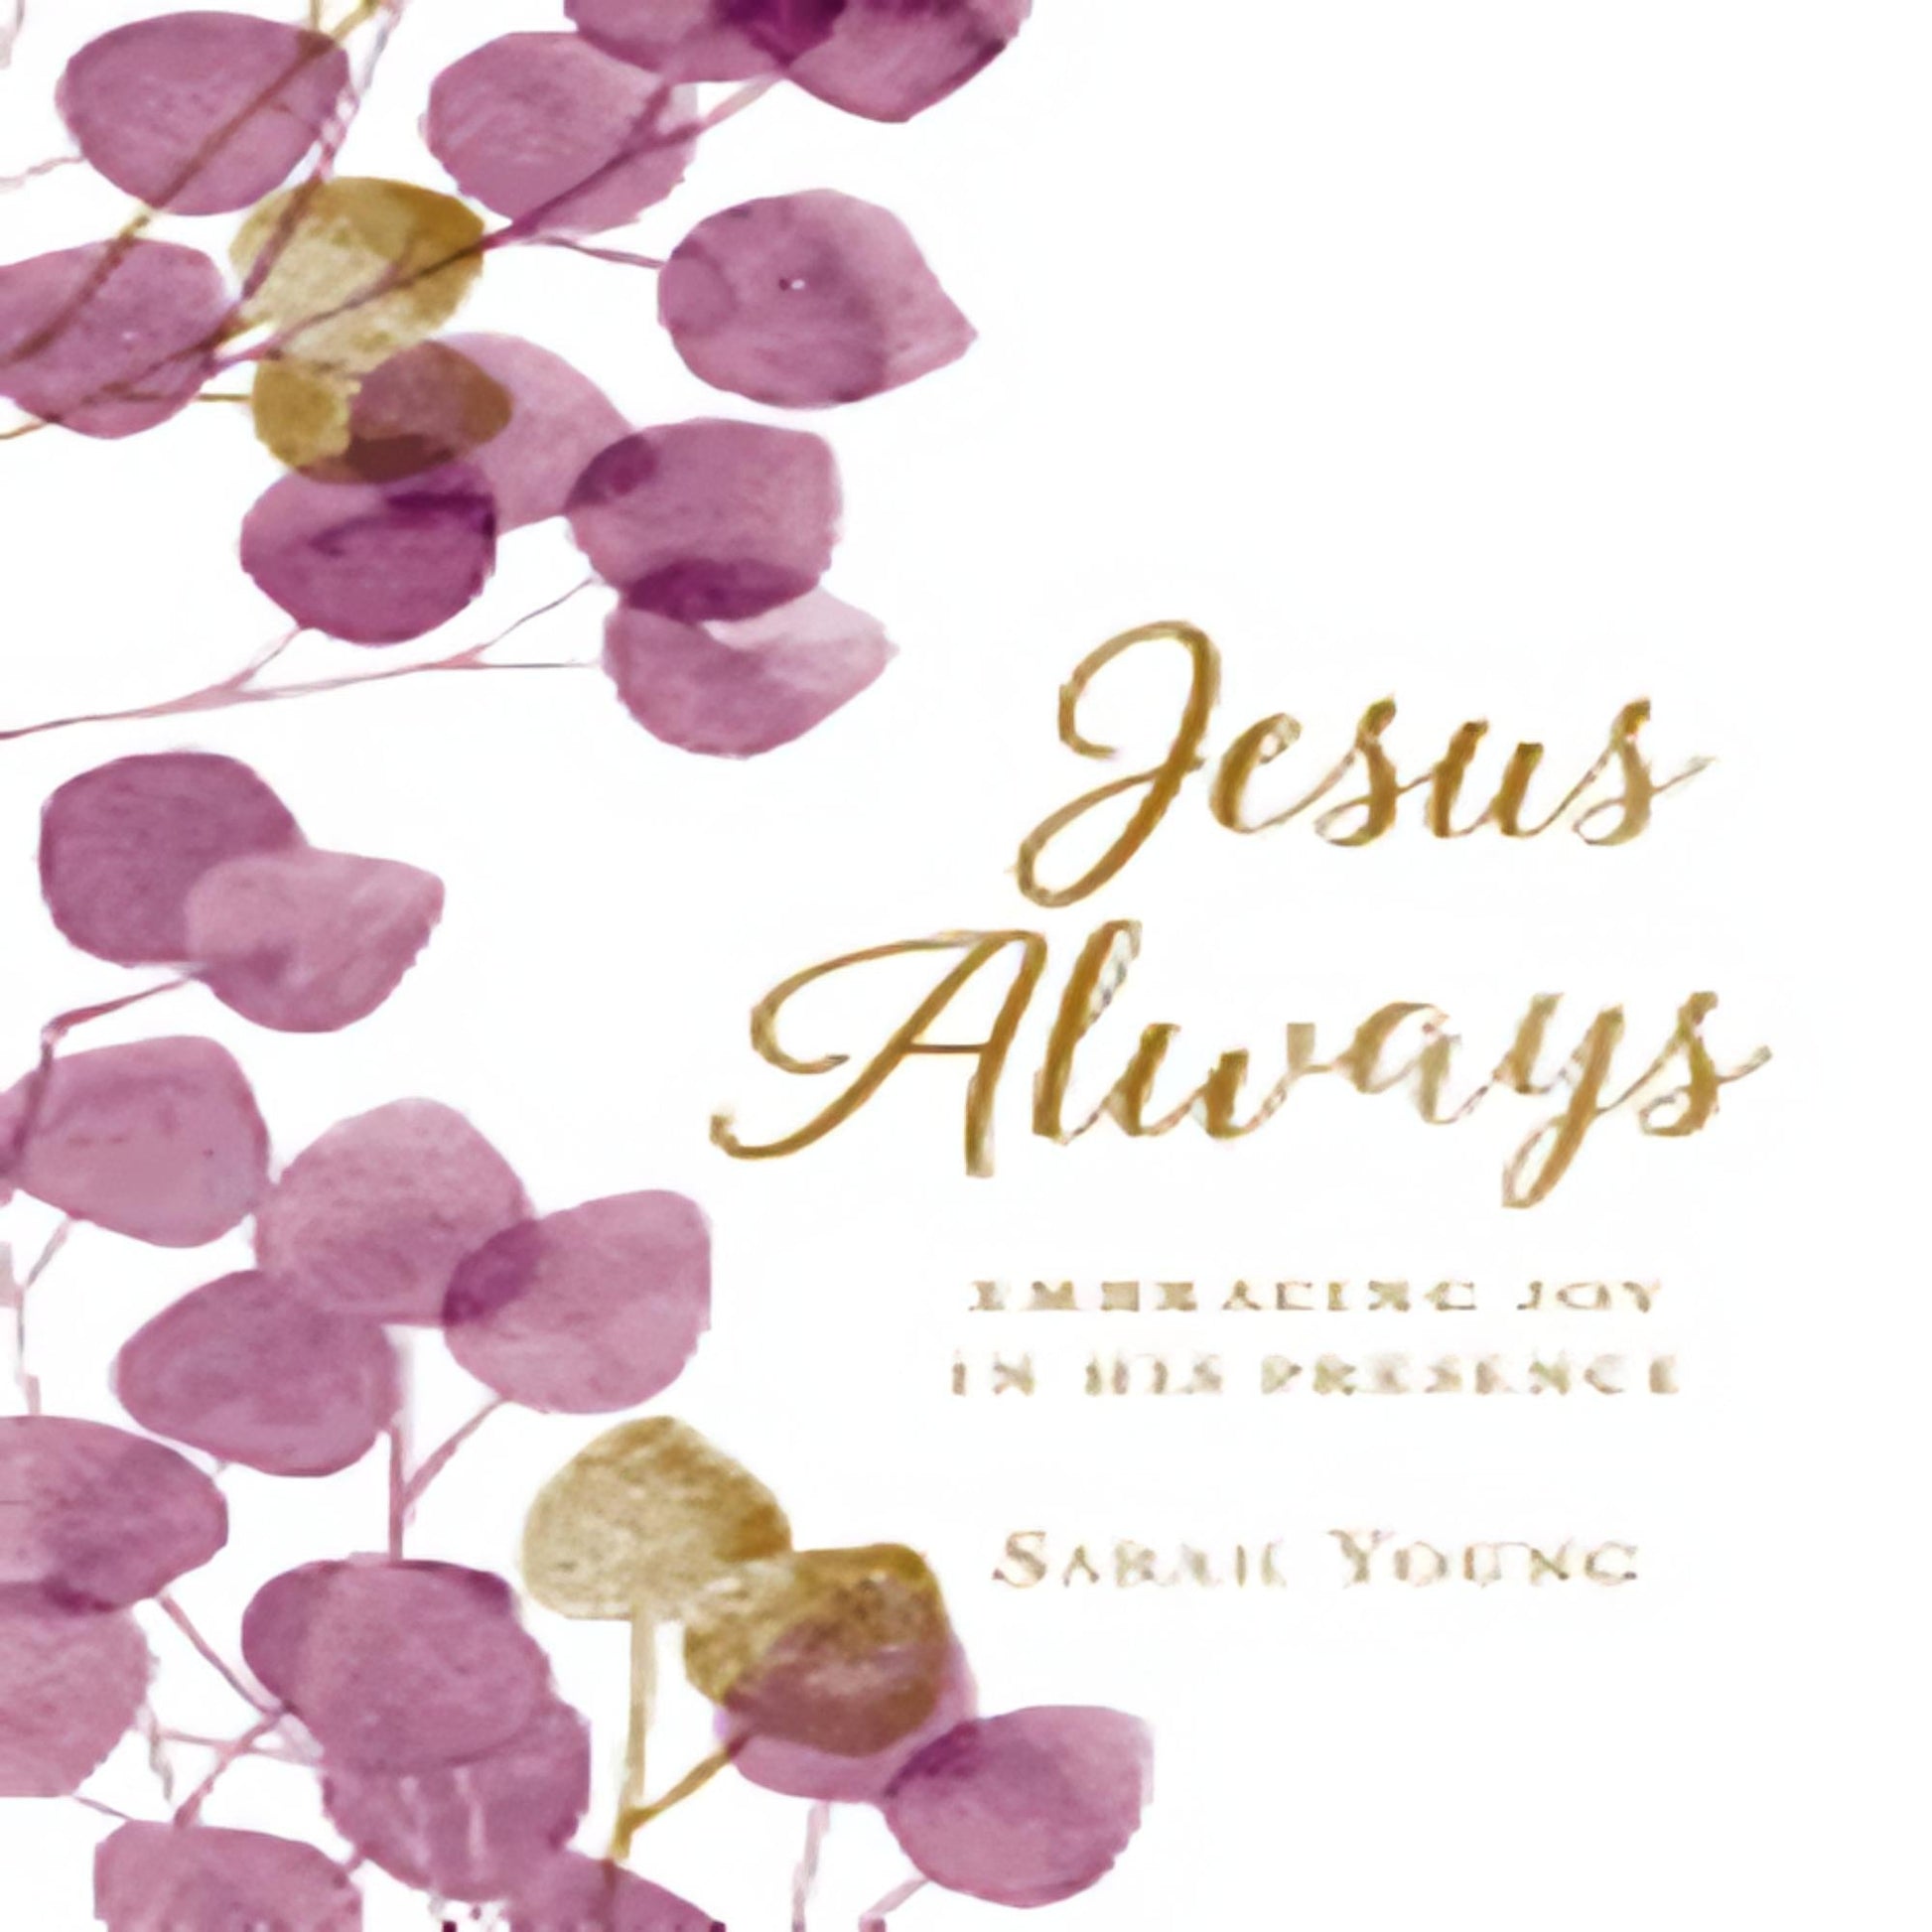 Jesus Always, Large Text Cloth Botanical Cover, with Full Scriptures: Embracing Joy in His Presence (a 365-Day Devotional) (Jesus Always) - Large Print86-021523-1400214777DPGBOOKSTORE.COM. Today's Bestsellers.